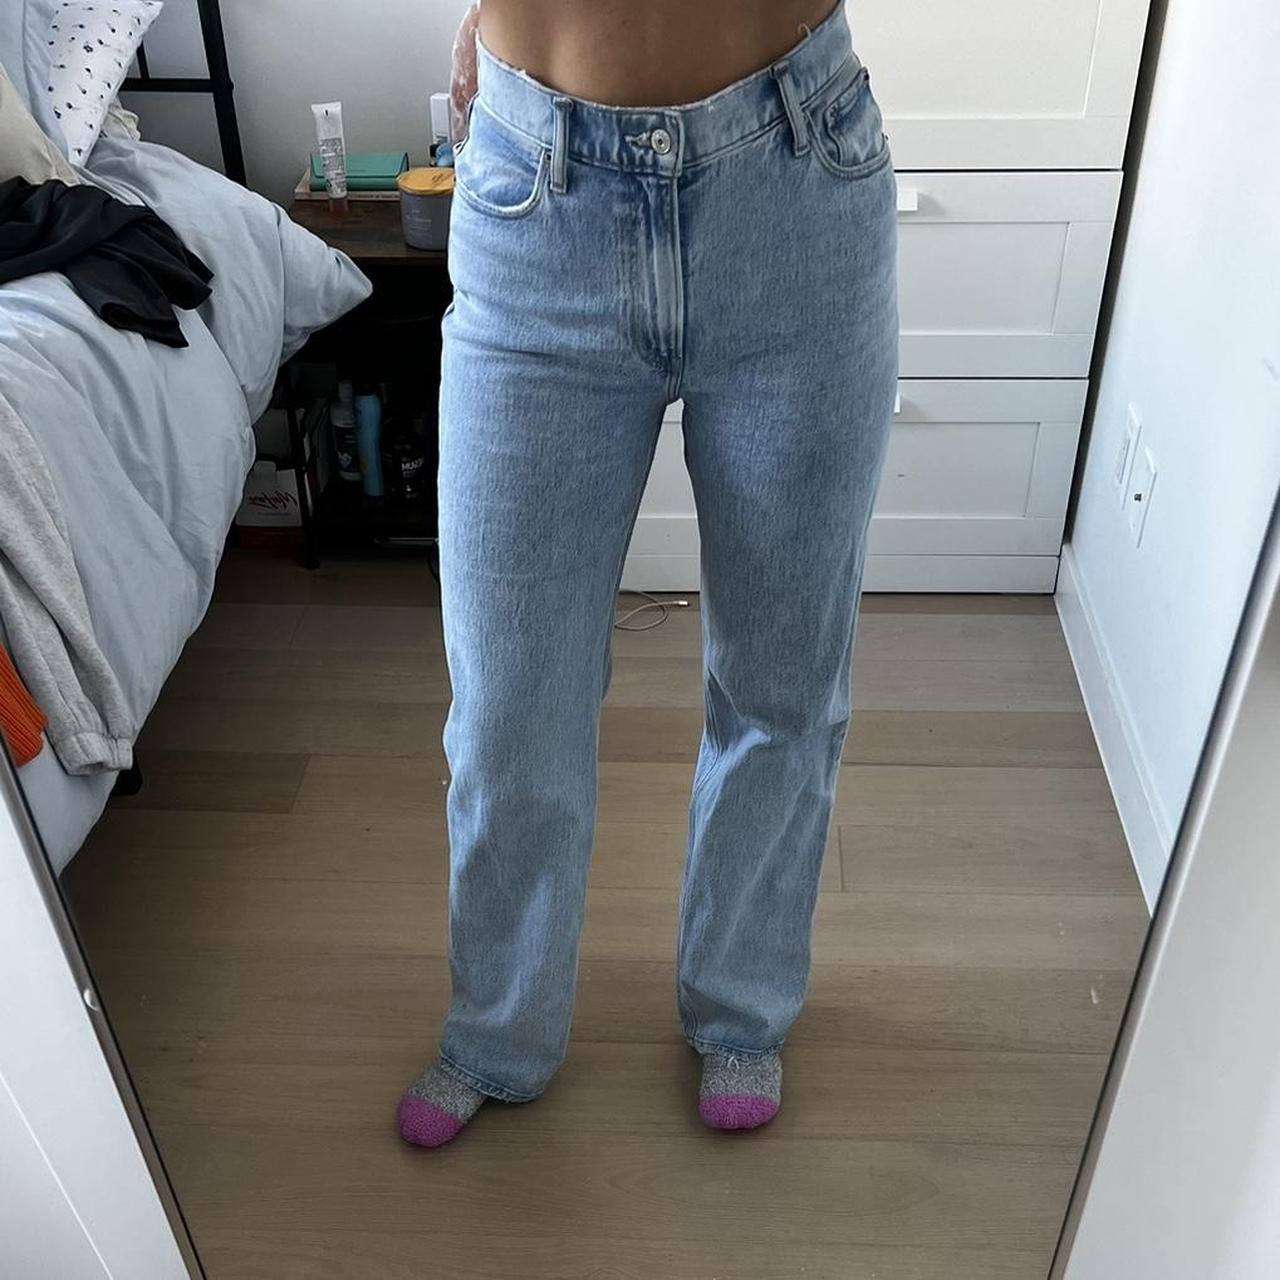 Abercrombie & Fitch 90’s relaxed jean -High... - Depop